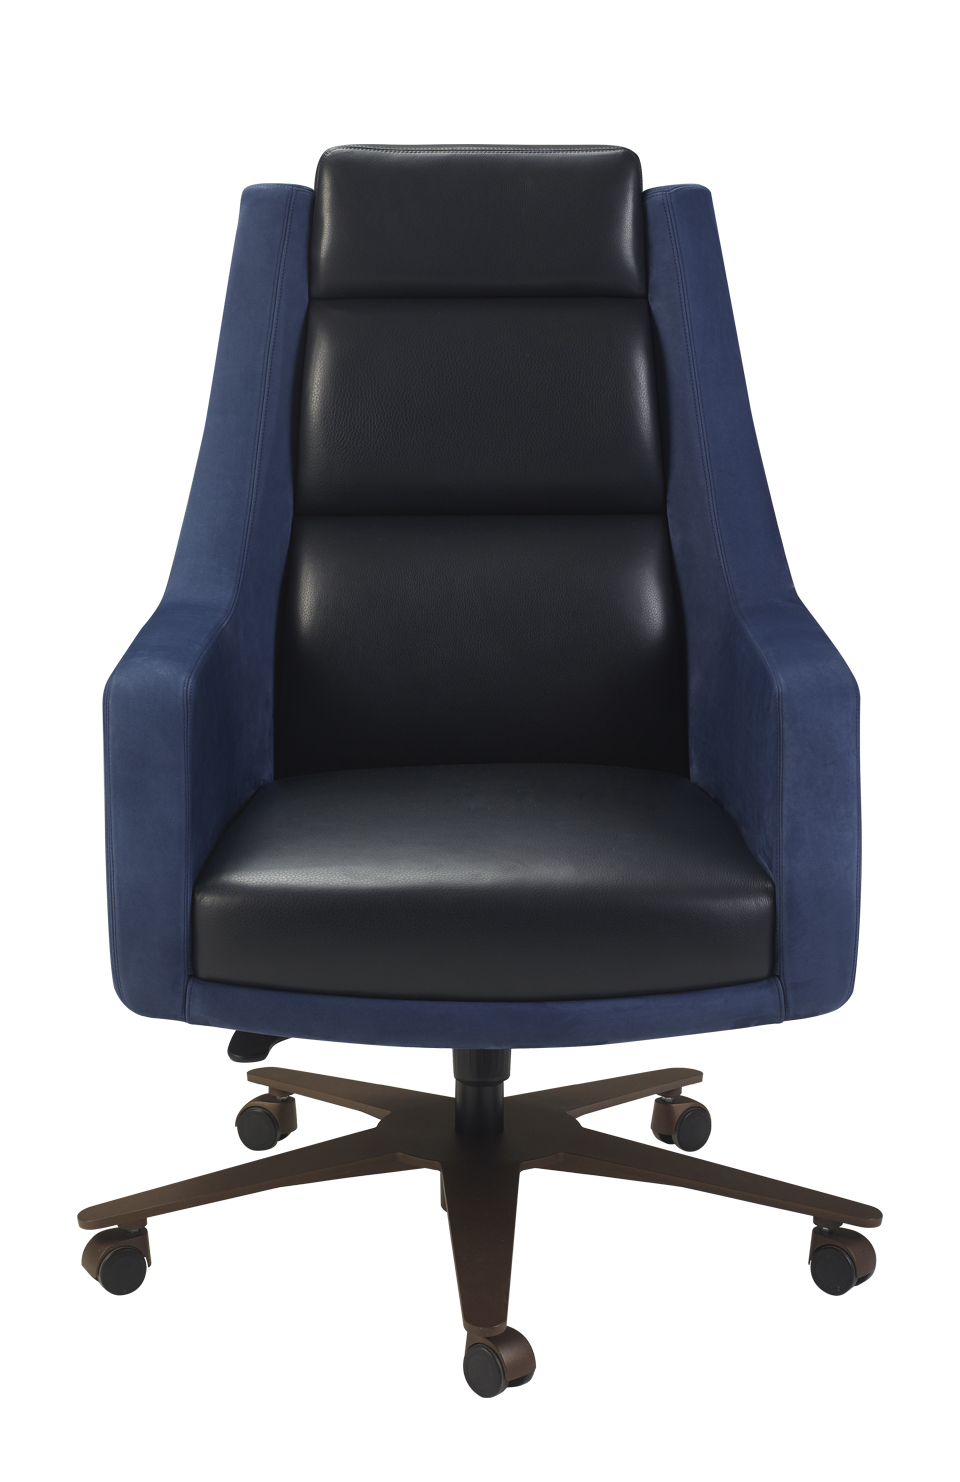 /mediaKate%20is%20an%20office%20chair%20with%20a%20metal%20base%20covered%20in%20leather%20and%20fabric,%20from%20Promemoria's%20Amaranthine%20Tales%20collection%20|%20Promemoria